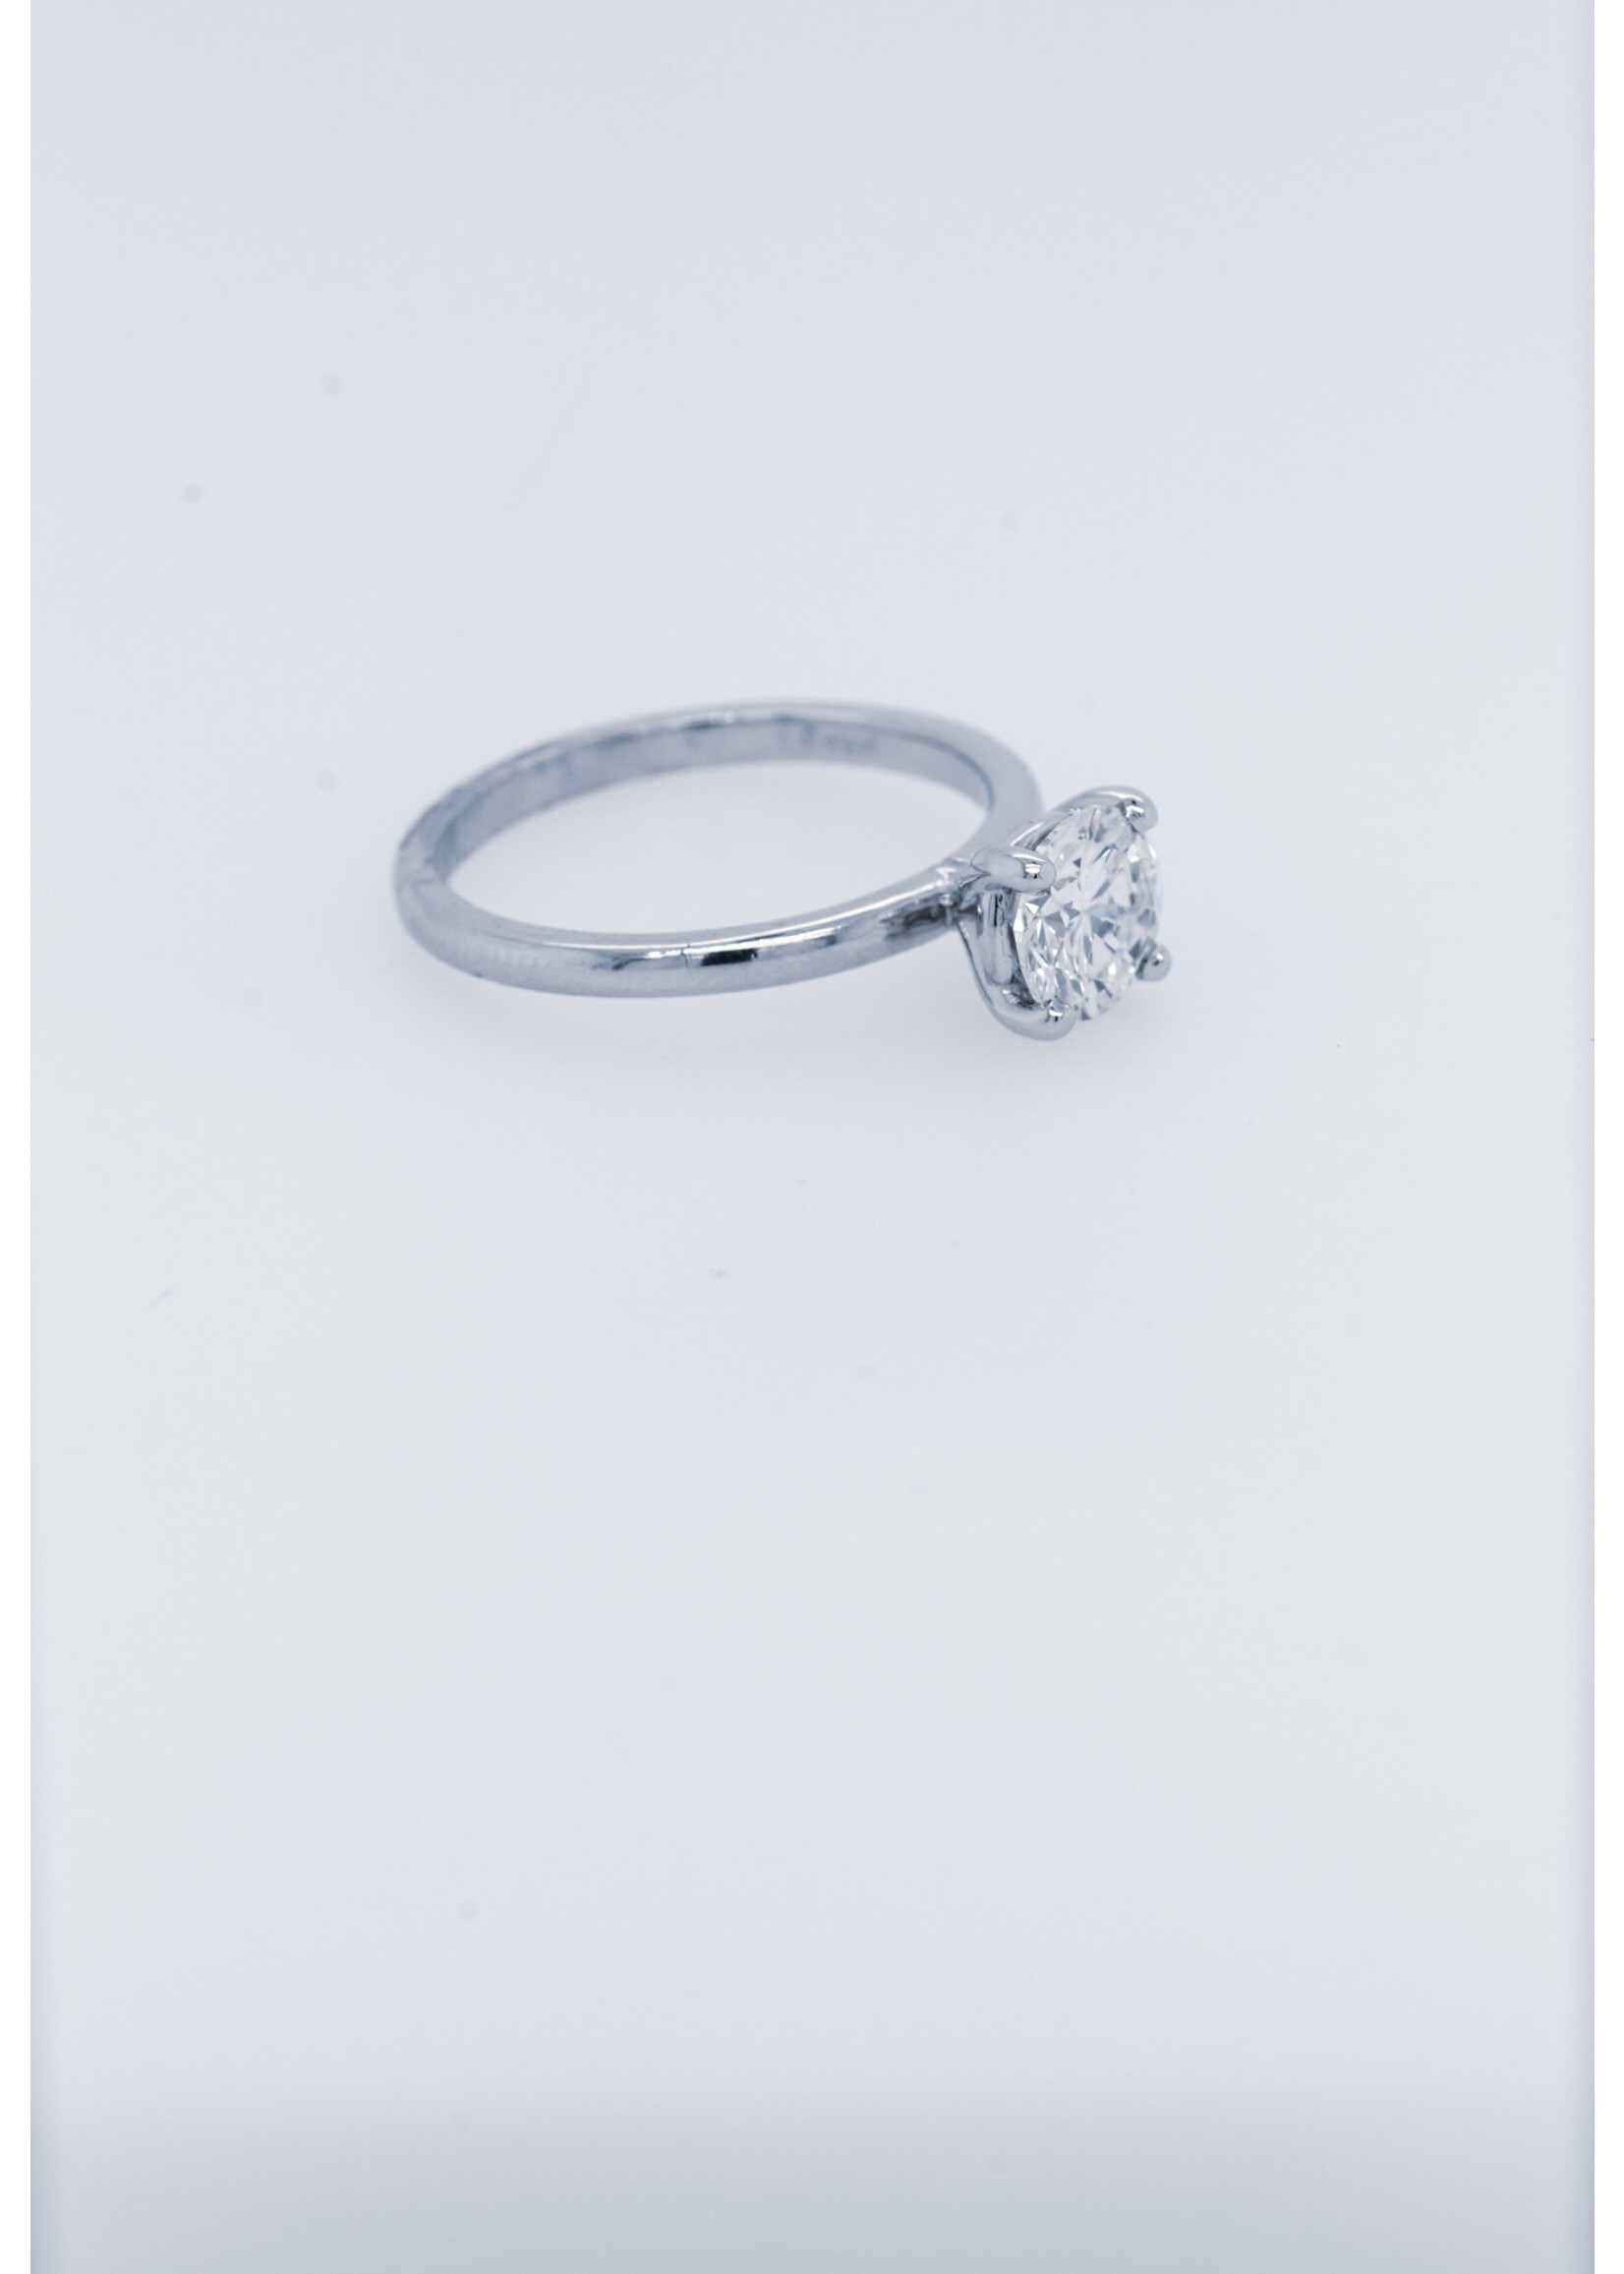 14KW 2.78g 1.04ct J/VS2 Round Diamond Solitaire Engagement Ring (size 6.75)